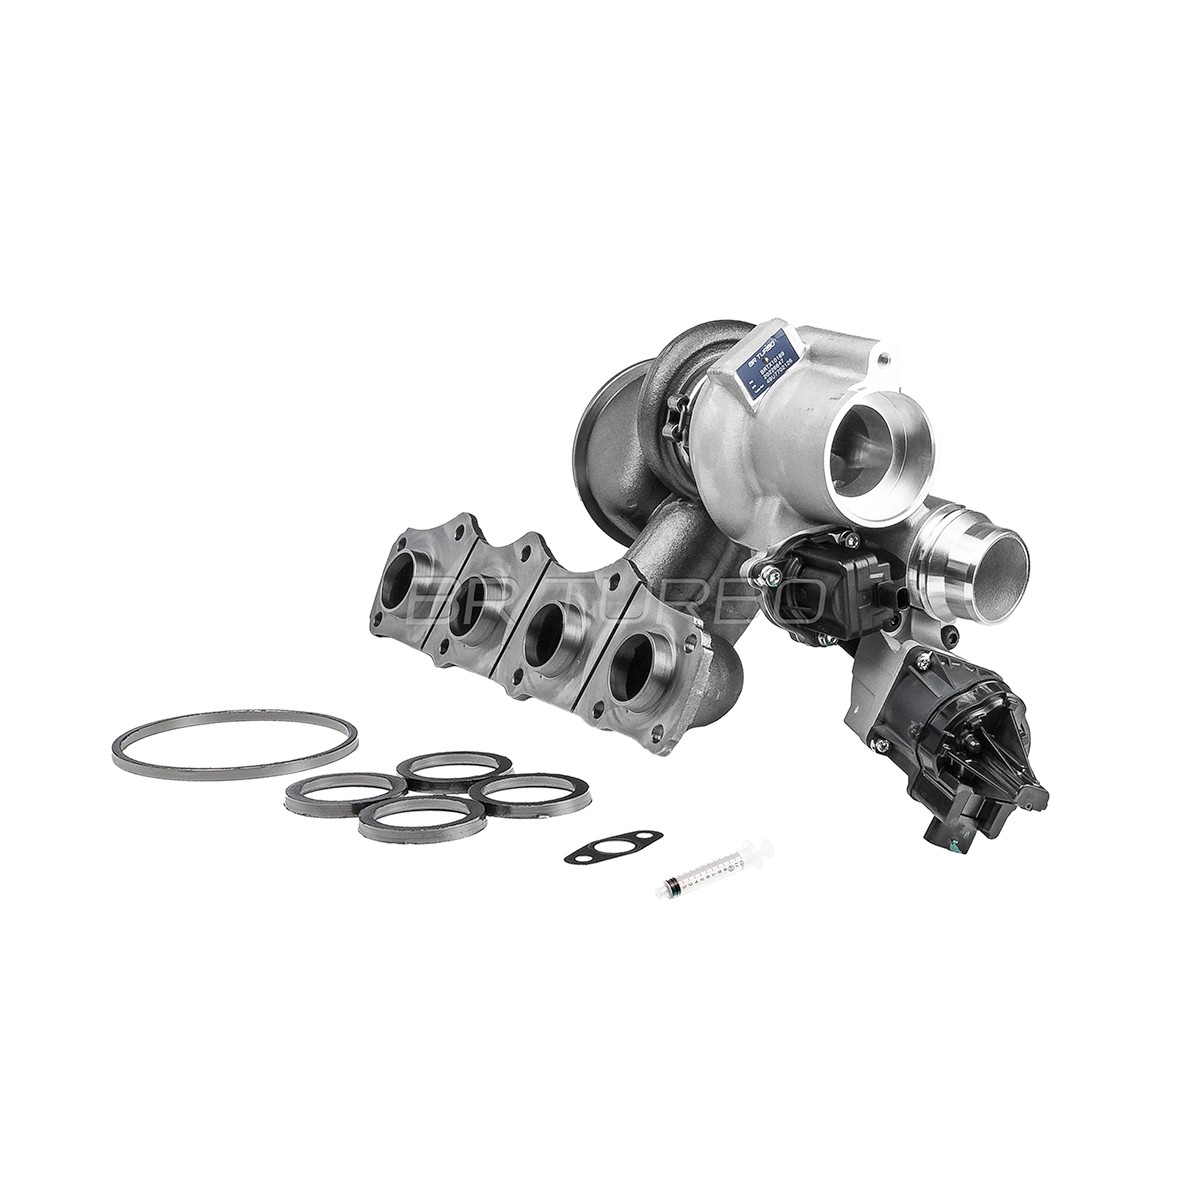 BRTX10189 Turbocharger NEW BR TURBO TURBOCHARGER WITH GASKET KIT BR Turbo BRTX10189 review and test